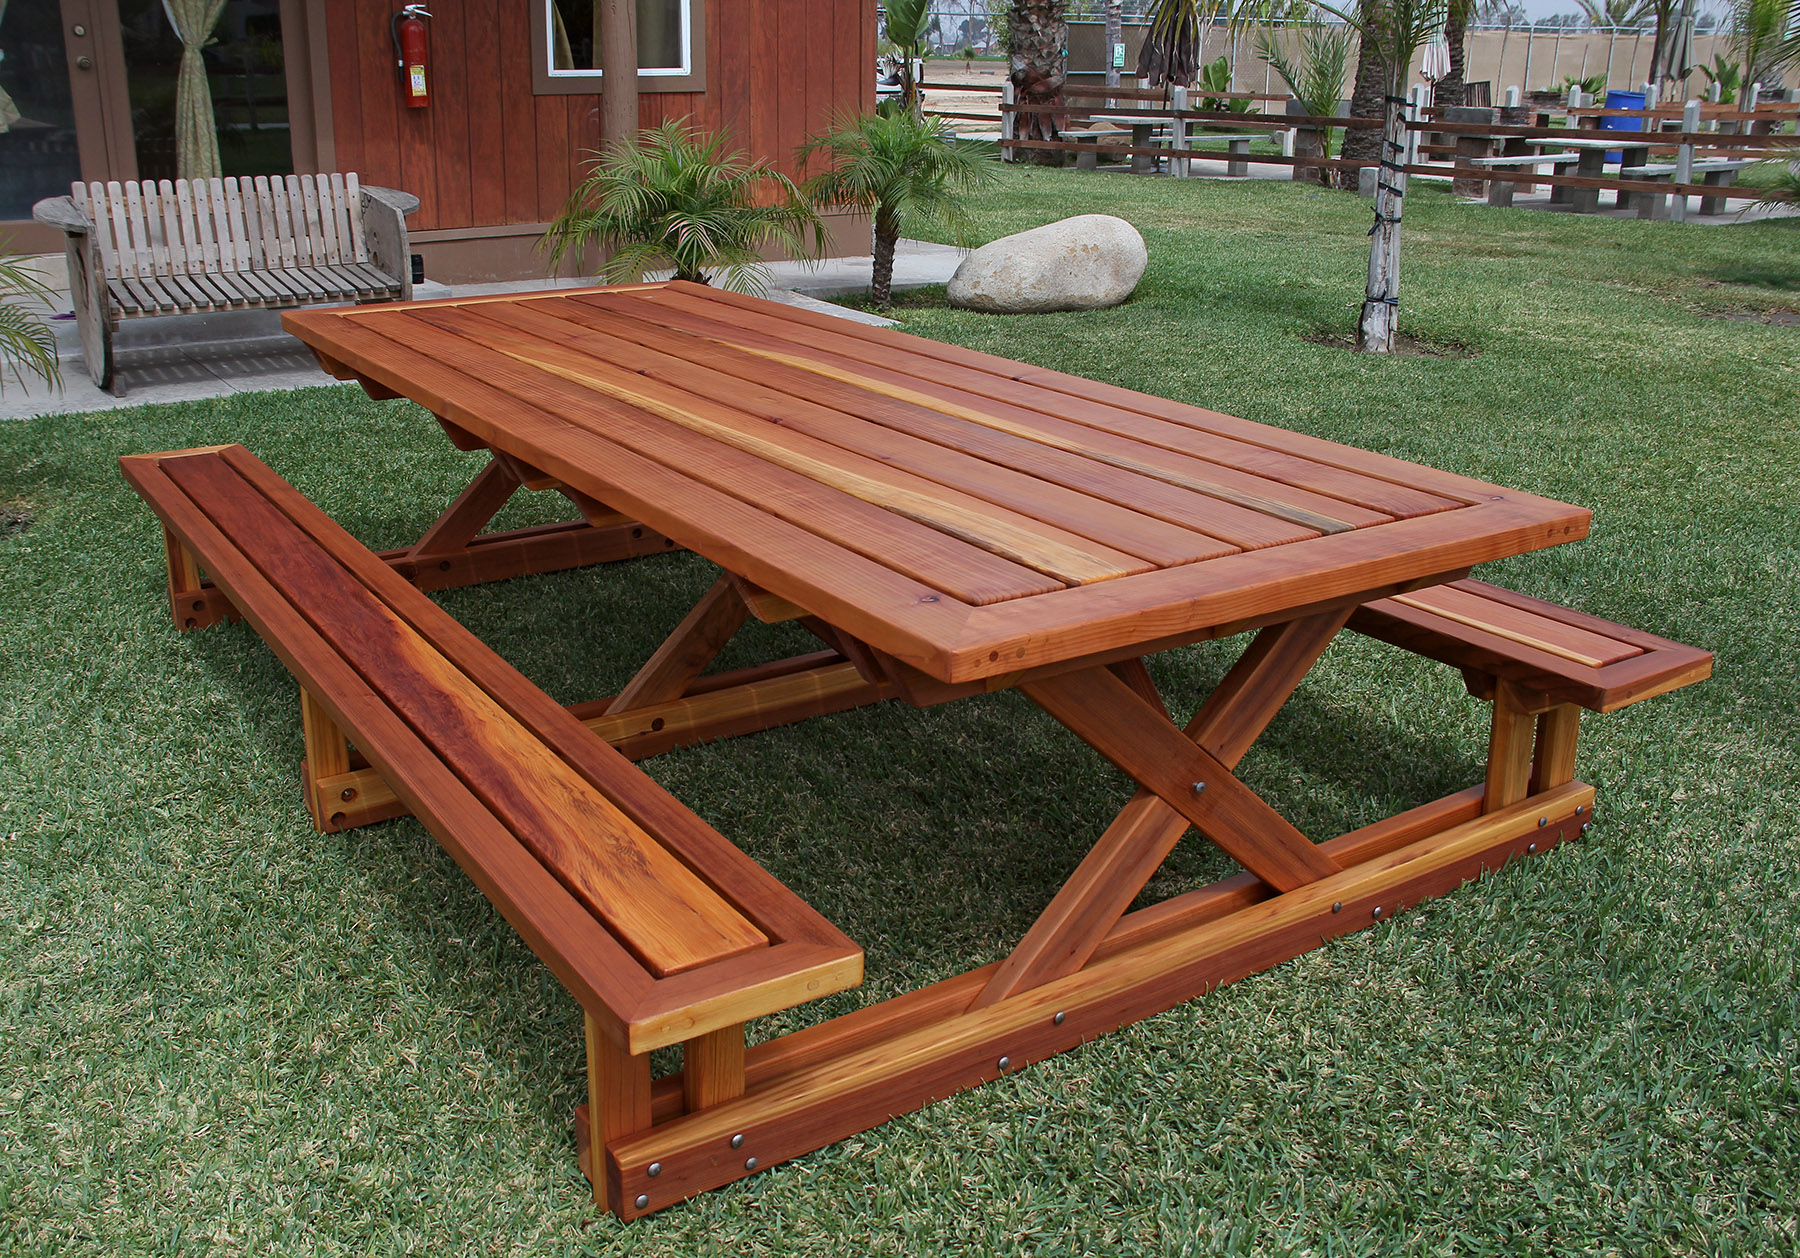 Chris's Picnic Table with Attached Benches